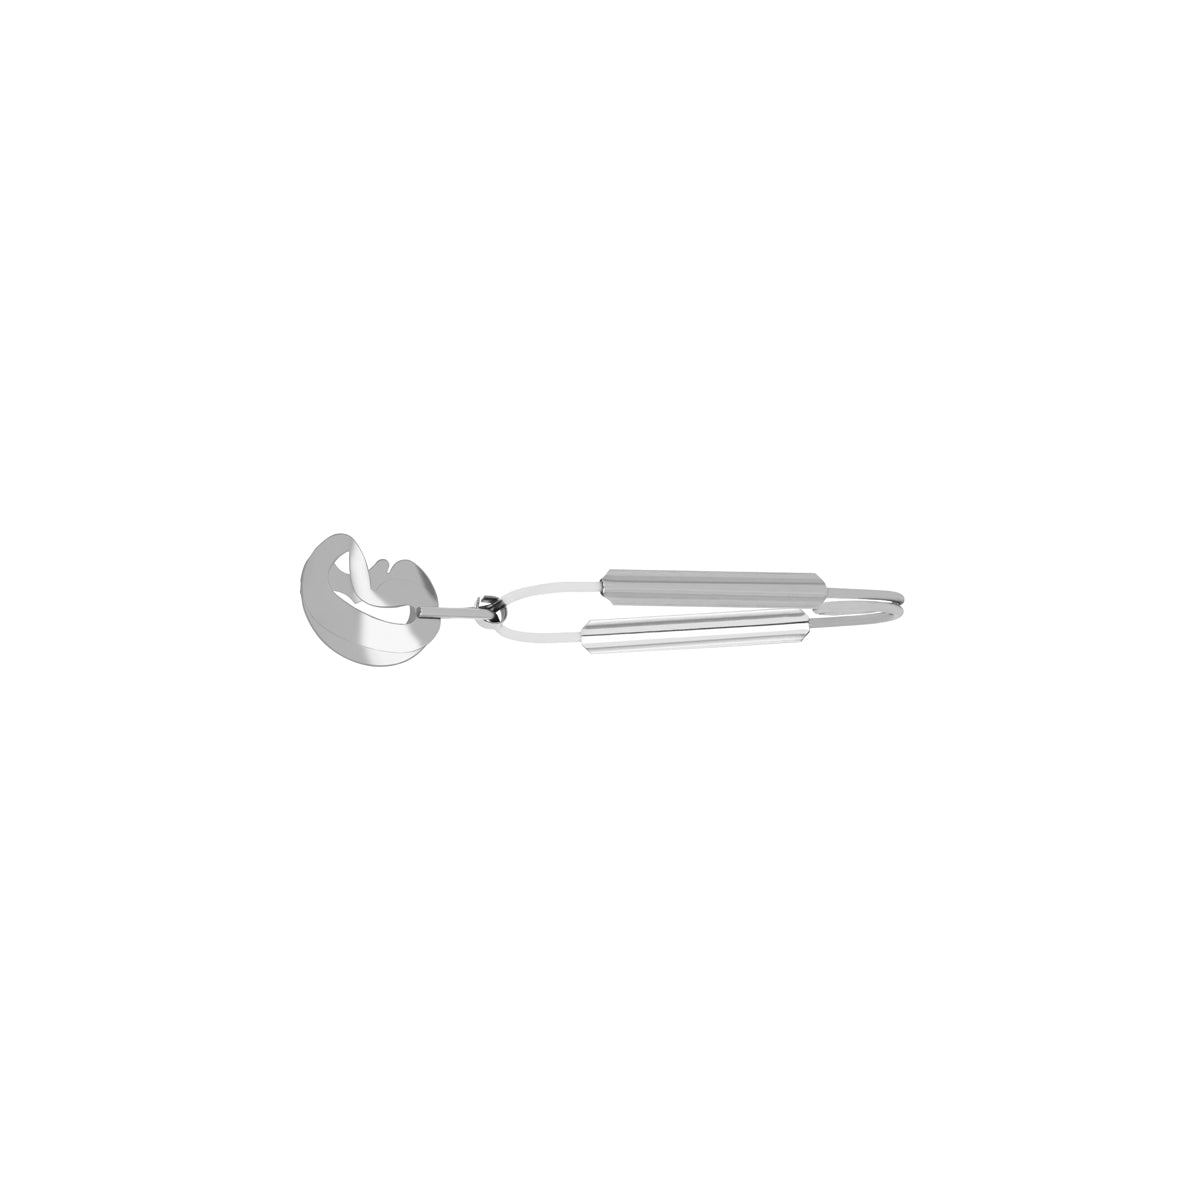 '07731 Chef Inox Snail Tong Stainless Steel 170mm Tomkin Australia Hospitality Supplies